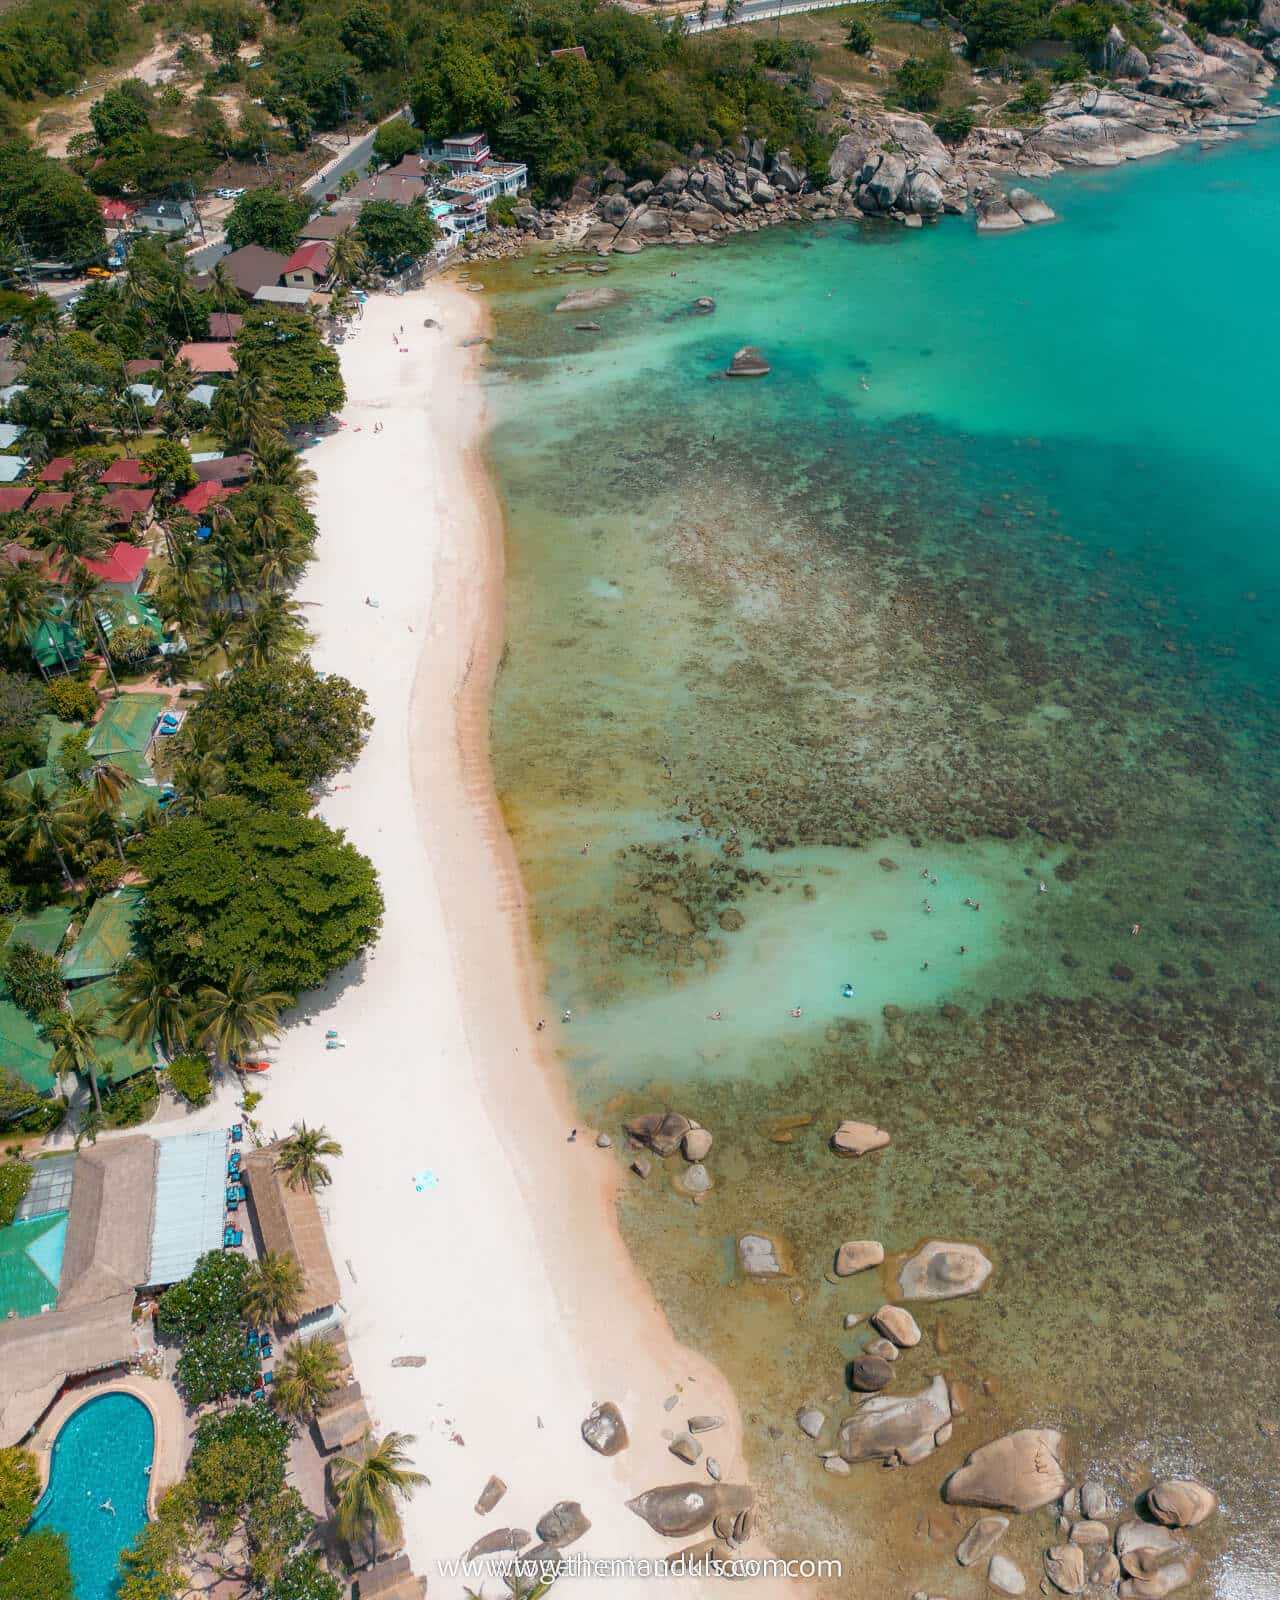 Best places to visit in Thailand for first timers - Koh Samui Silver beach drone best beaches thailand koh samui things to do in koh samui top attractions koh samui itinerary